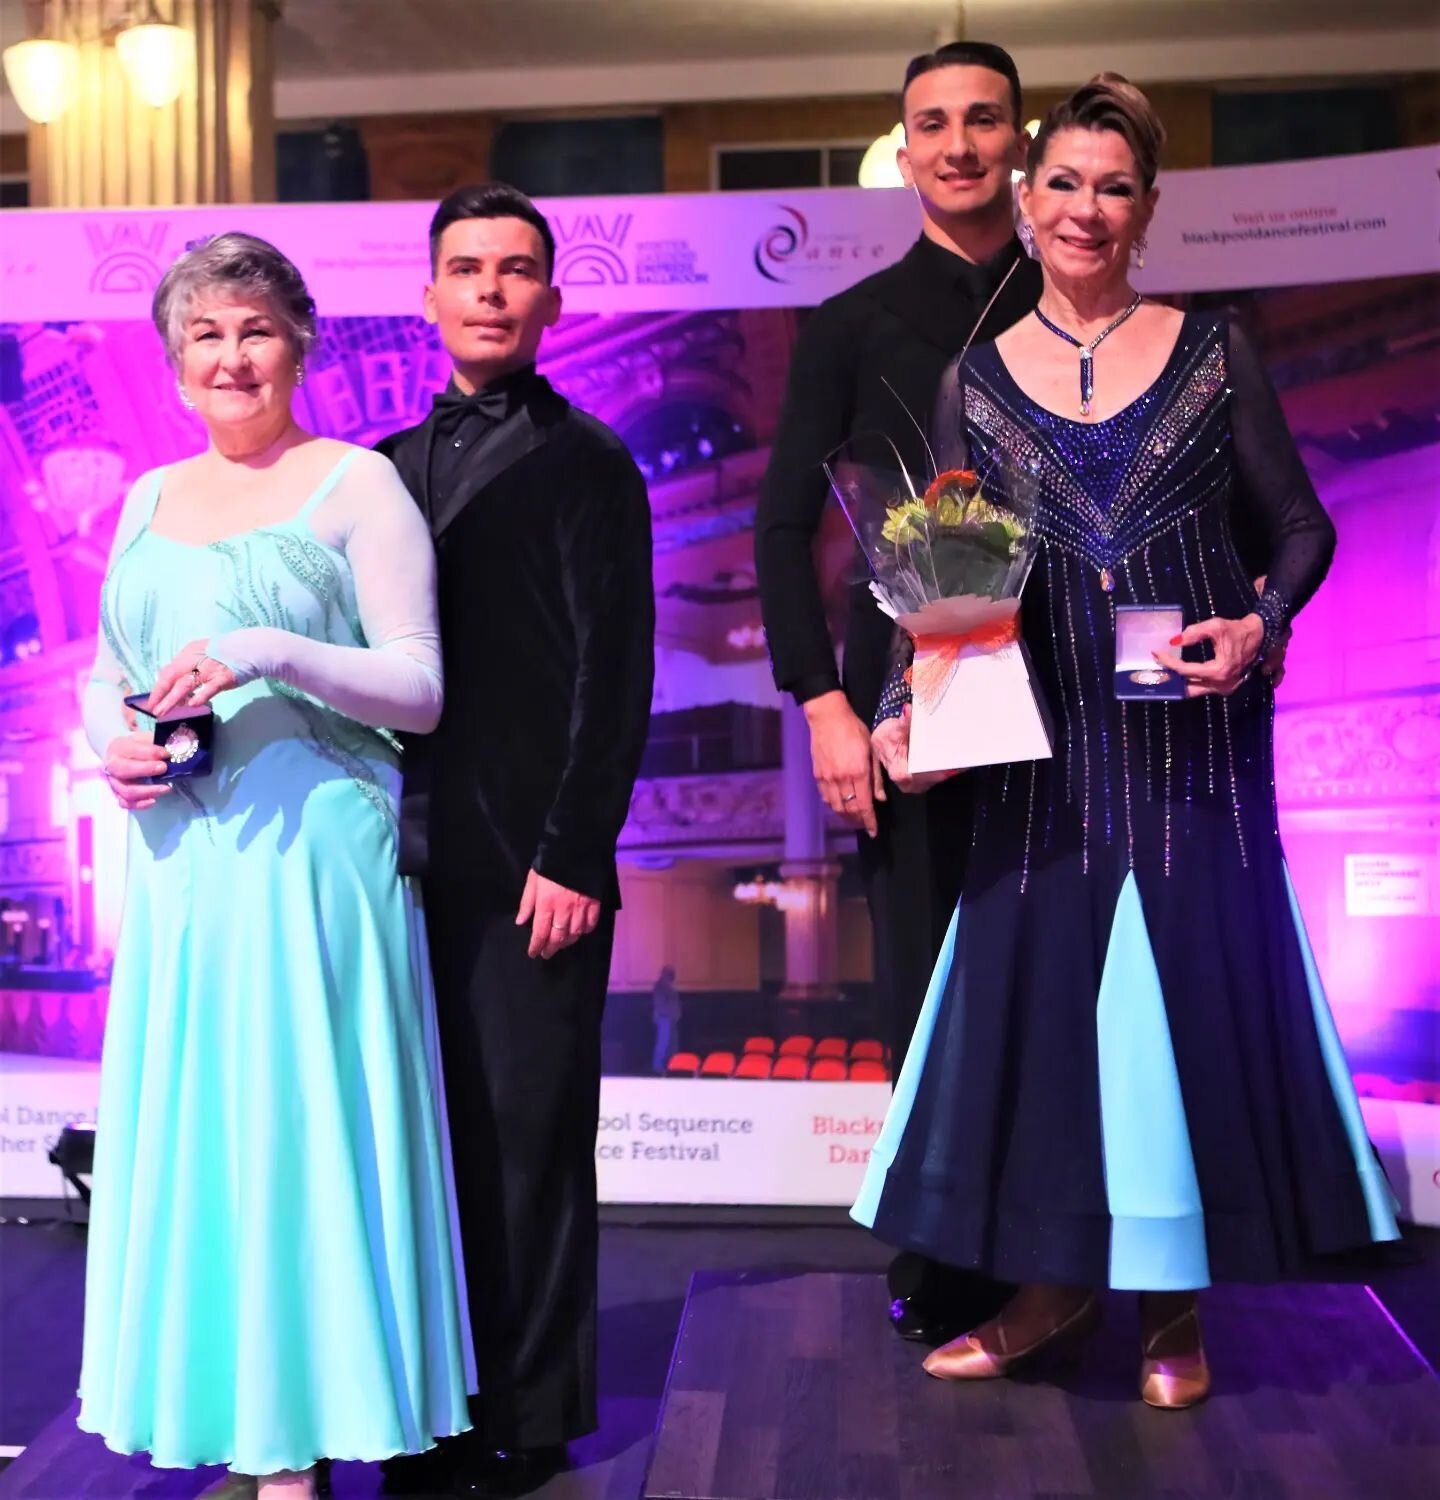 2022 BLACKPOOL CHAMPIONS!!

The Ocean's Dance Team has brought home another amazing victory from Europe! Christine Schneider Downs dancing with guest instructor Samuele Pugliese was crowned Blackpool Champion in her American Smooth Championship event